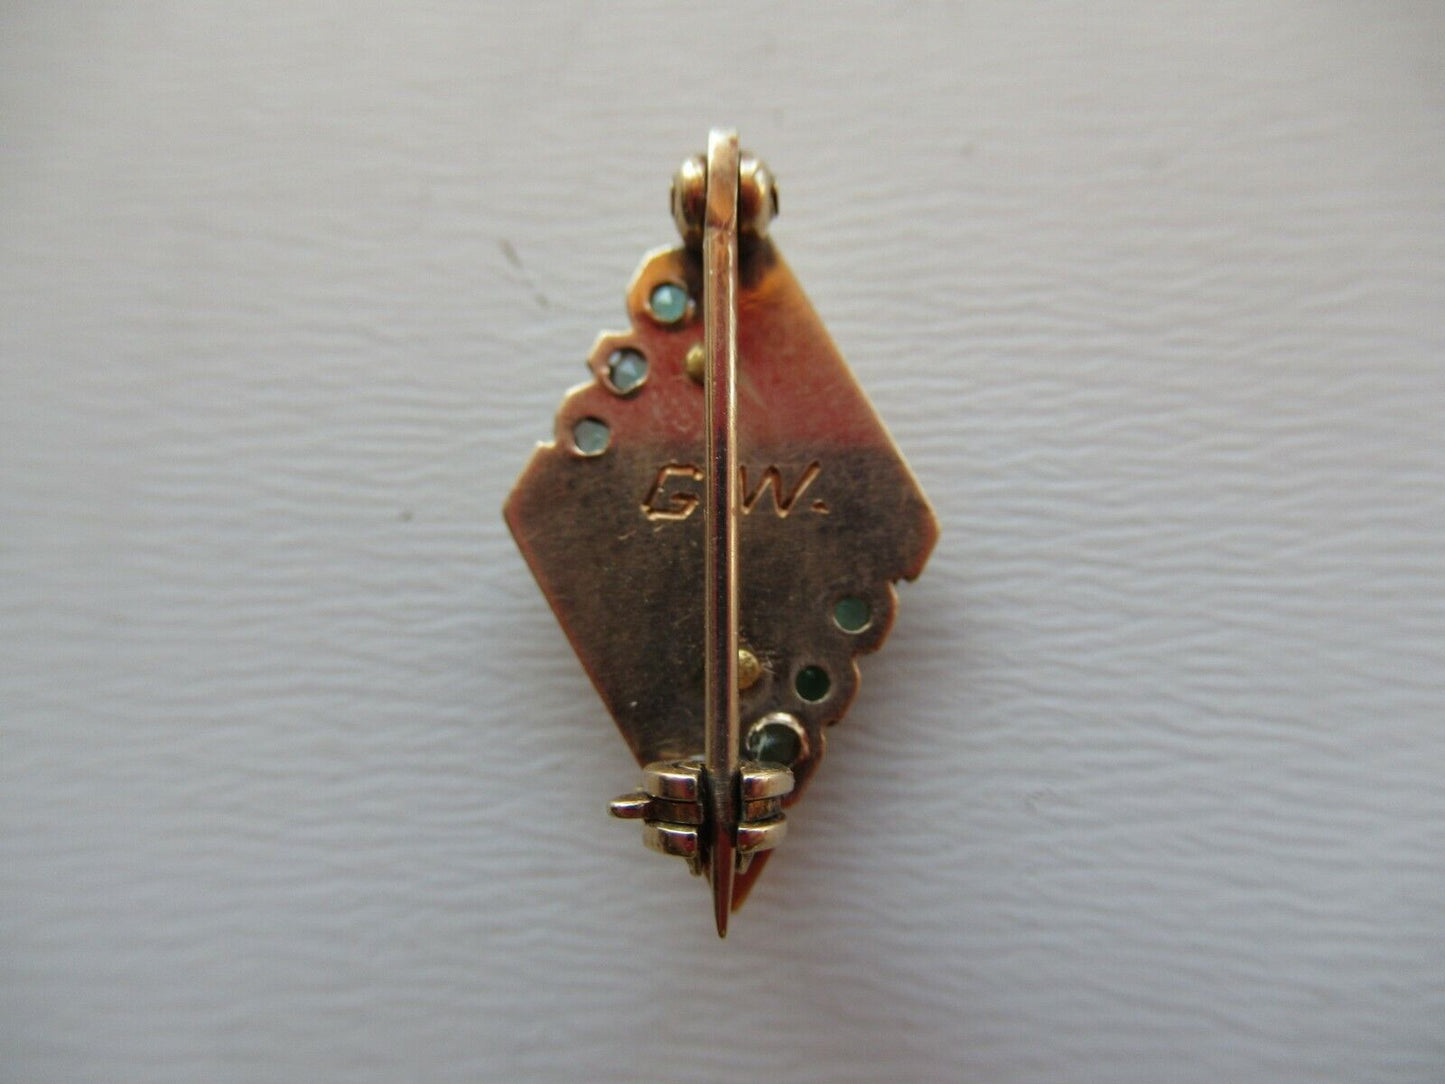 USA FRATERNITY PIN DELTA LAMBDA. MADE IN GOLD. RUBIES. NAMED.1221